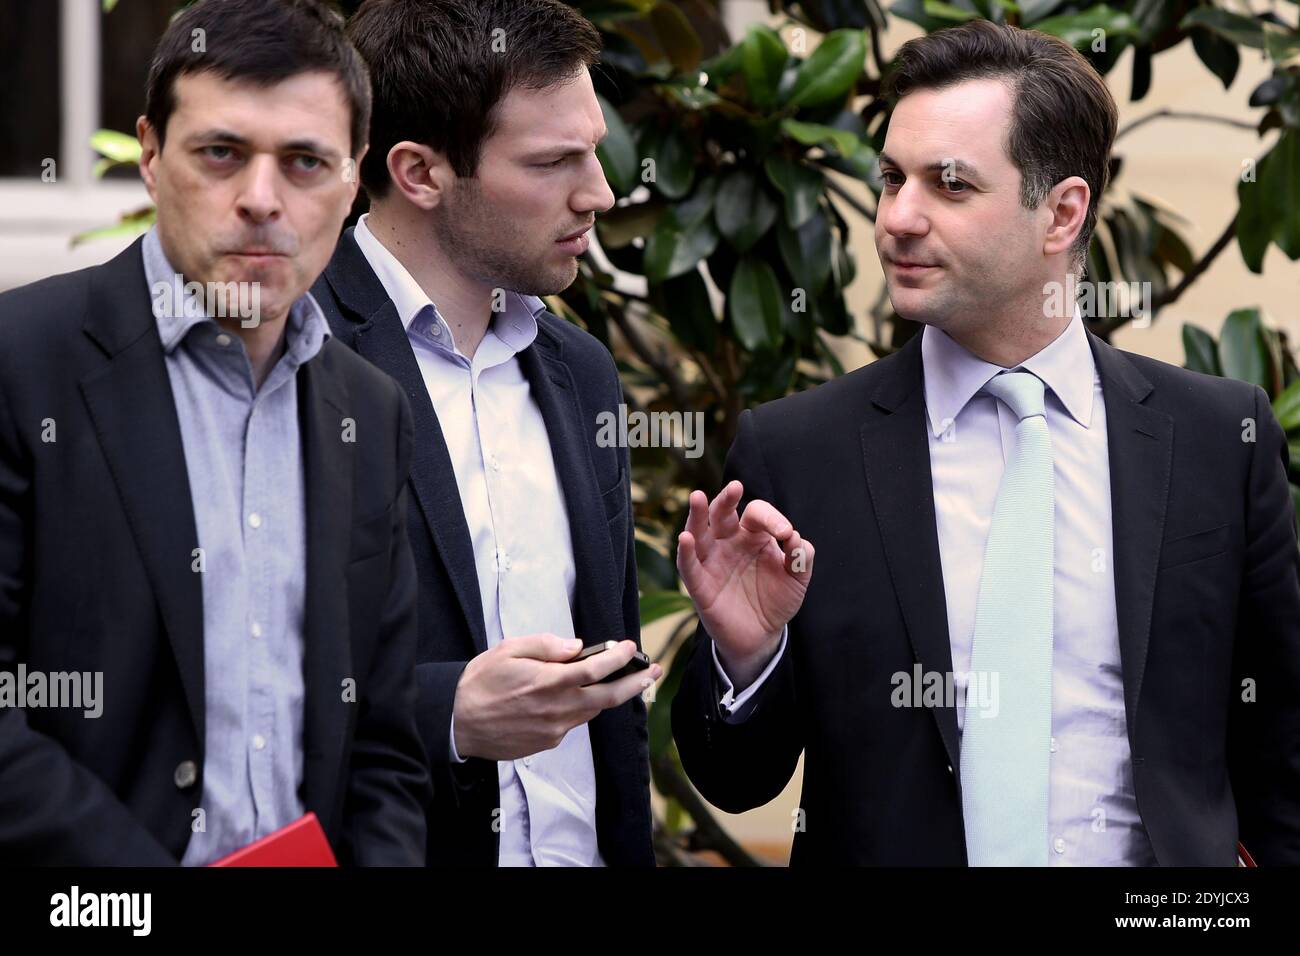 Communication advisors, Renaud Czarnes,Thibaud Brouard and Nicolas Namias are pictured during a meeting focused on the national Pact for growth, competitiveness and employment at the hotel Matignon, in Paris, France on April 18, 2013. Photo by Stephane Lemouton/ABACAPRESS.COM Stock Photo